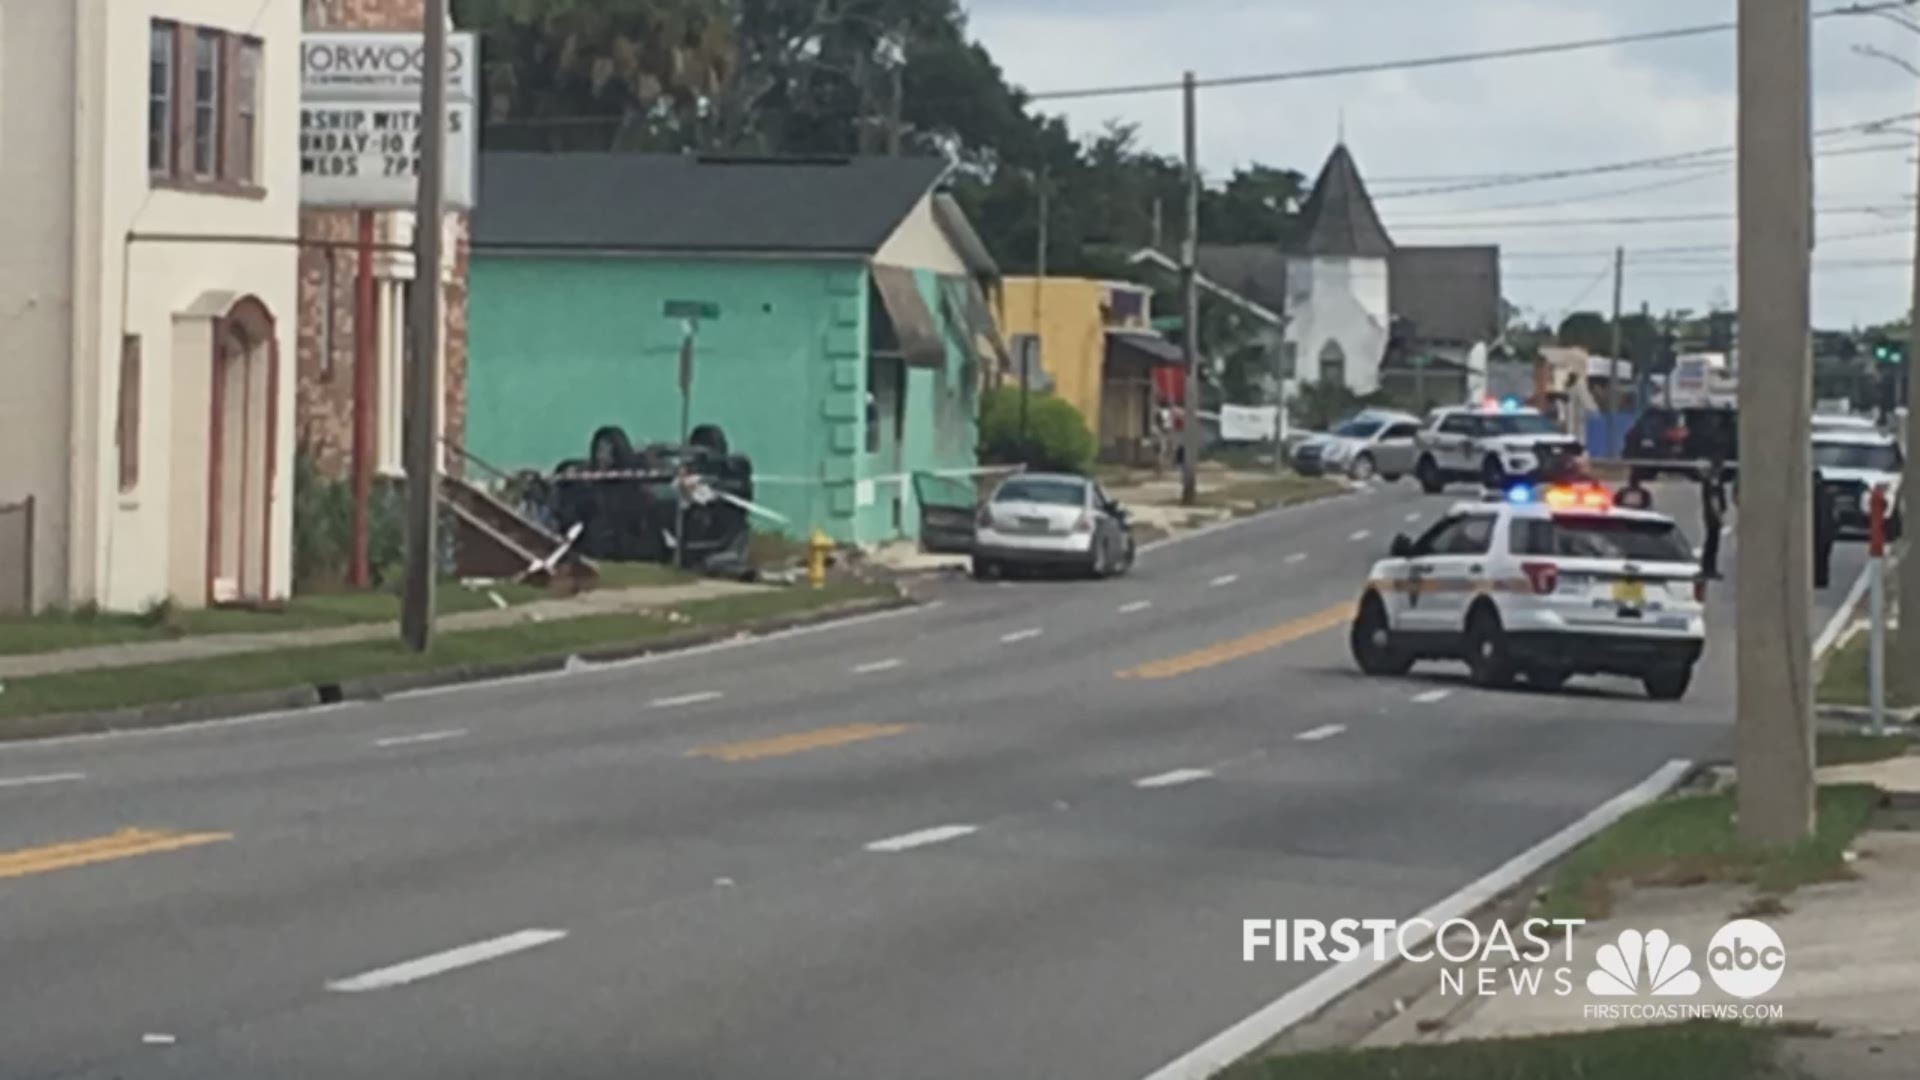 The Jacksonville Sheriff's Office says both the northbound and southbound lanes in the area of 6500 Norwood are blocked due to the crash.